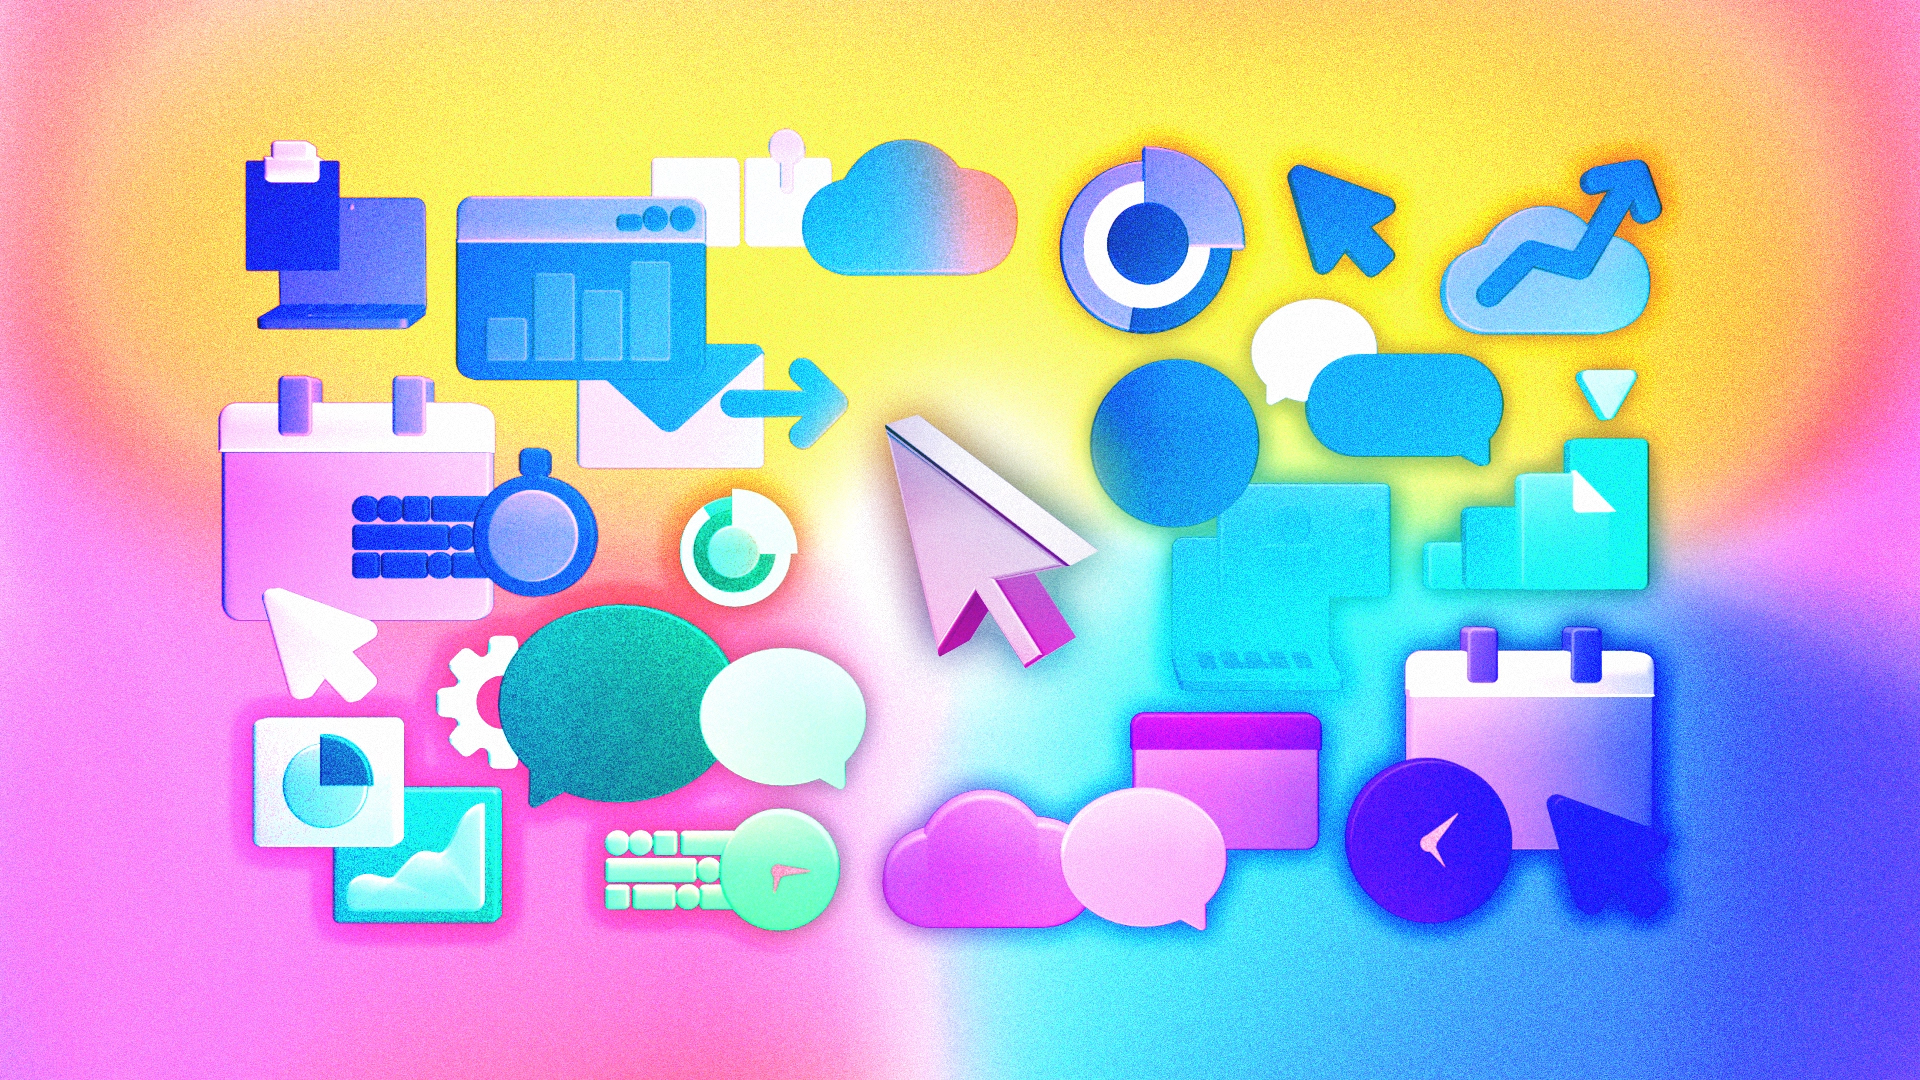 A colorful animated illustration of a cursor moving to and fro around a montage of images representing different icons people encounter during their workday activities: documents, spreadsheets, calendars, presentations, chat bubbles, settings menus.